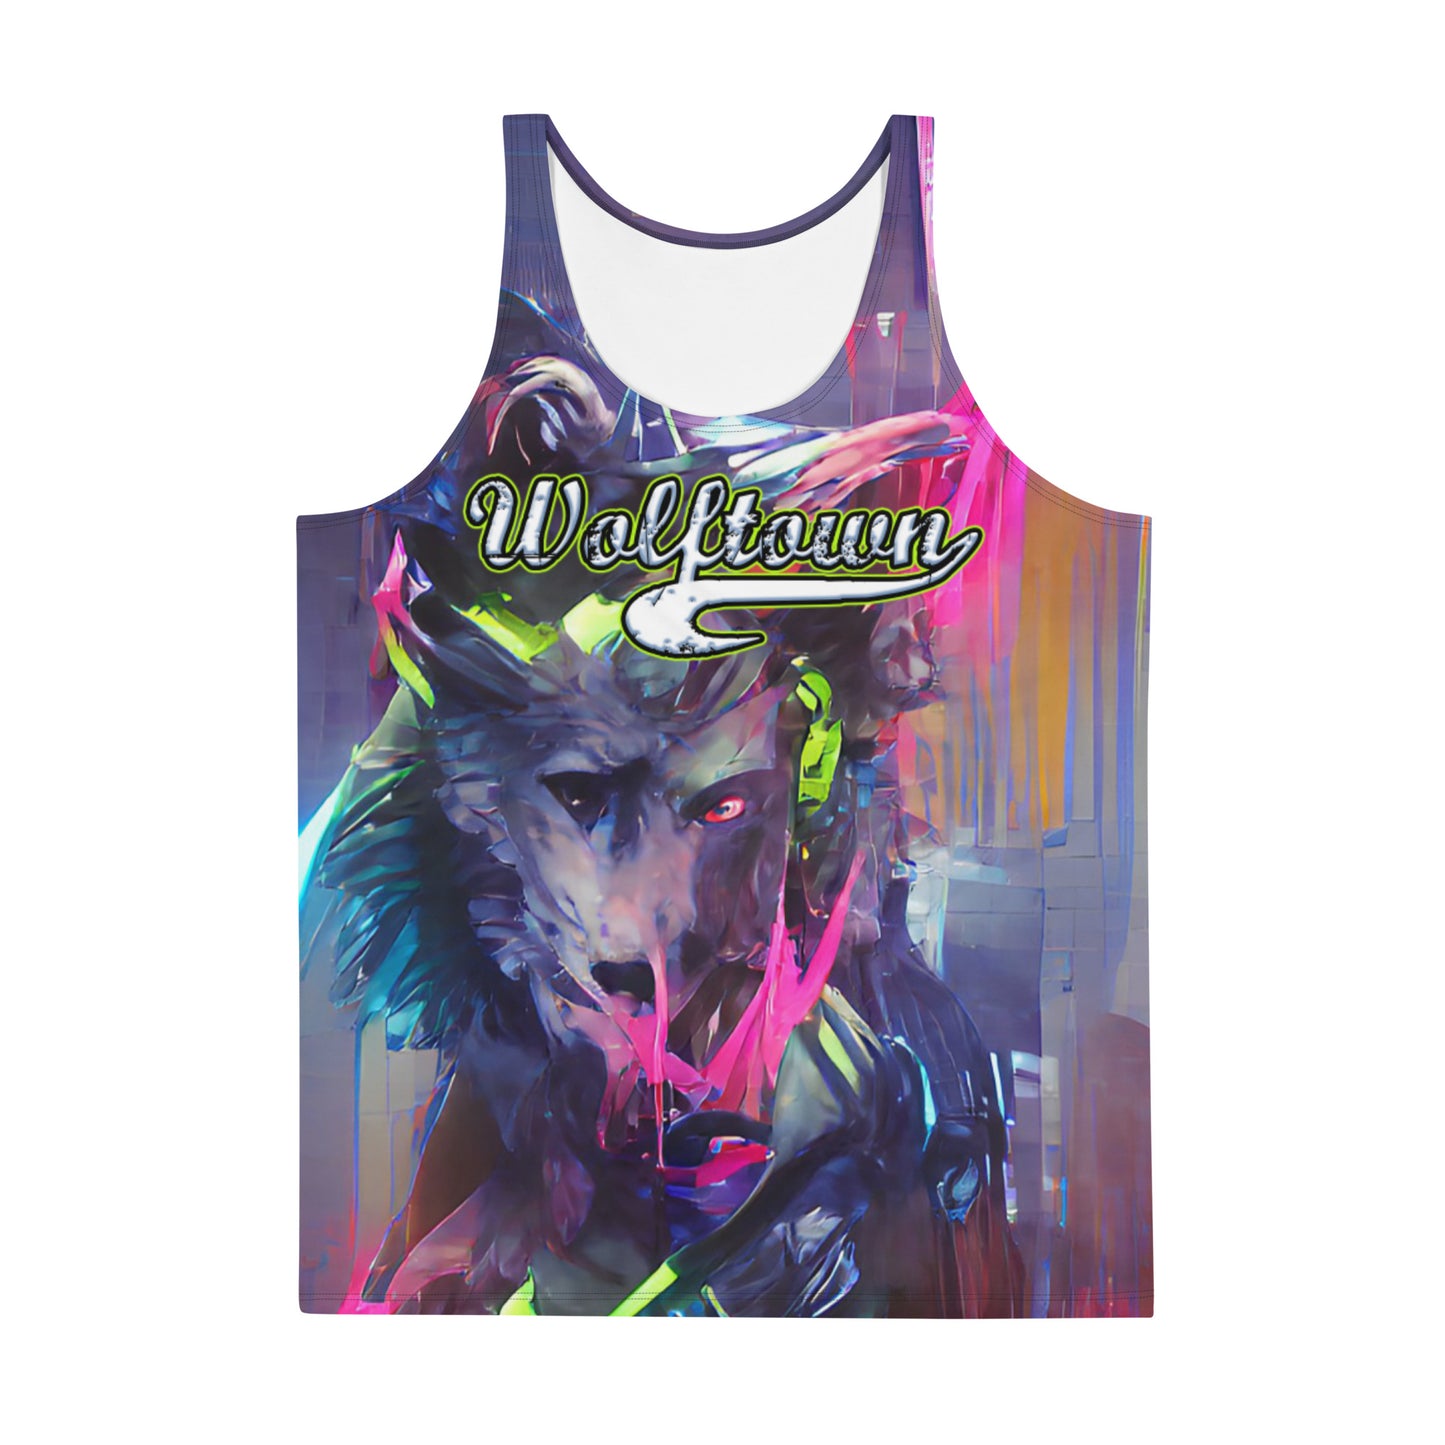 WOLFTOWN 'ANXIETY' (Tank Top)